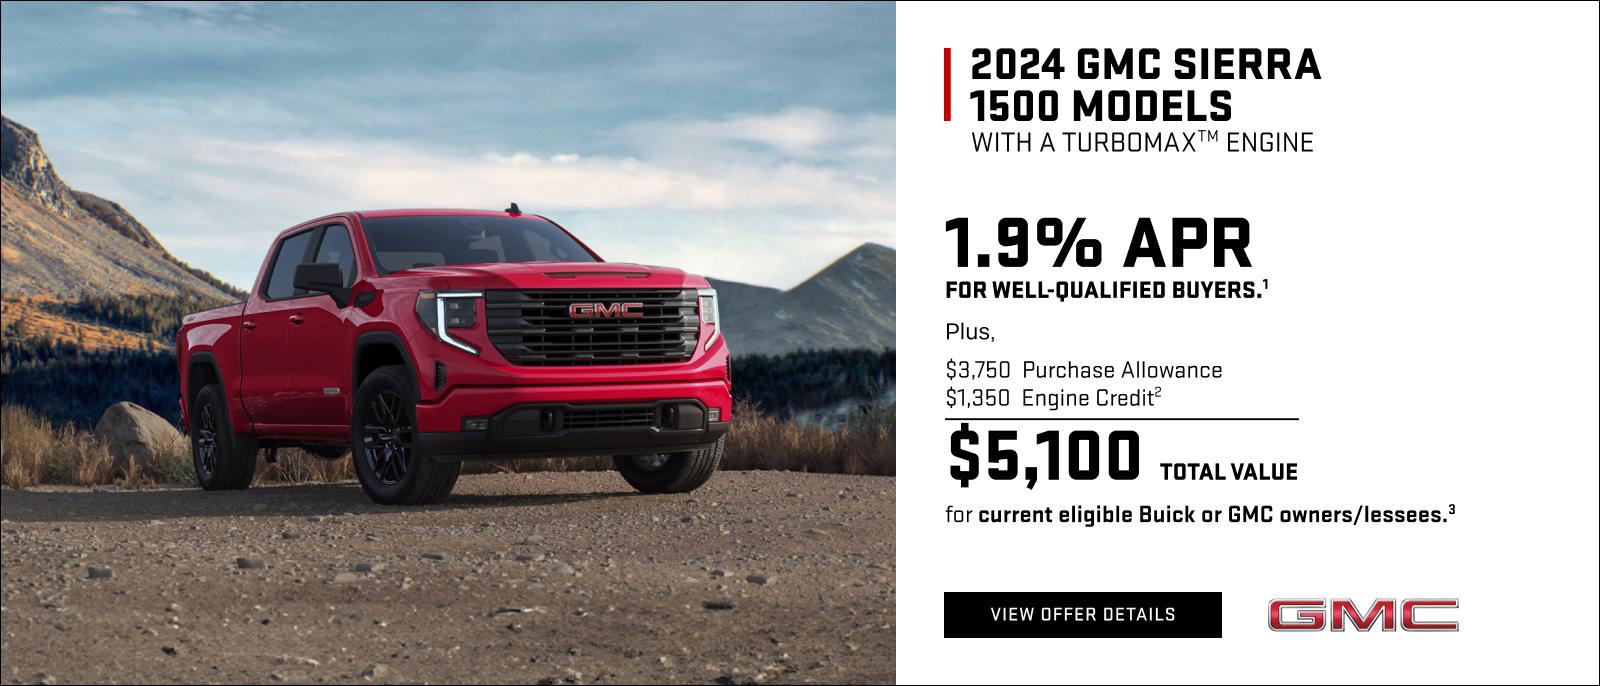 1.9% APR for well-qualified buyers.1

Plus

$3,750 Purchase Allowance
$1,350 Engine Credit2
$5,100 Total Value for current eligible Buick or GMC owners/lessees.3